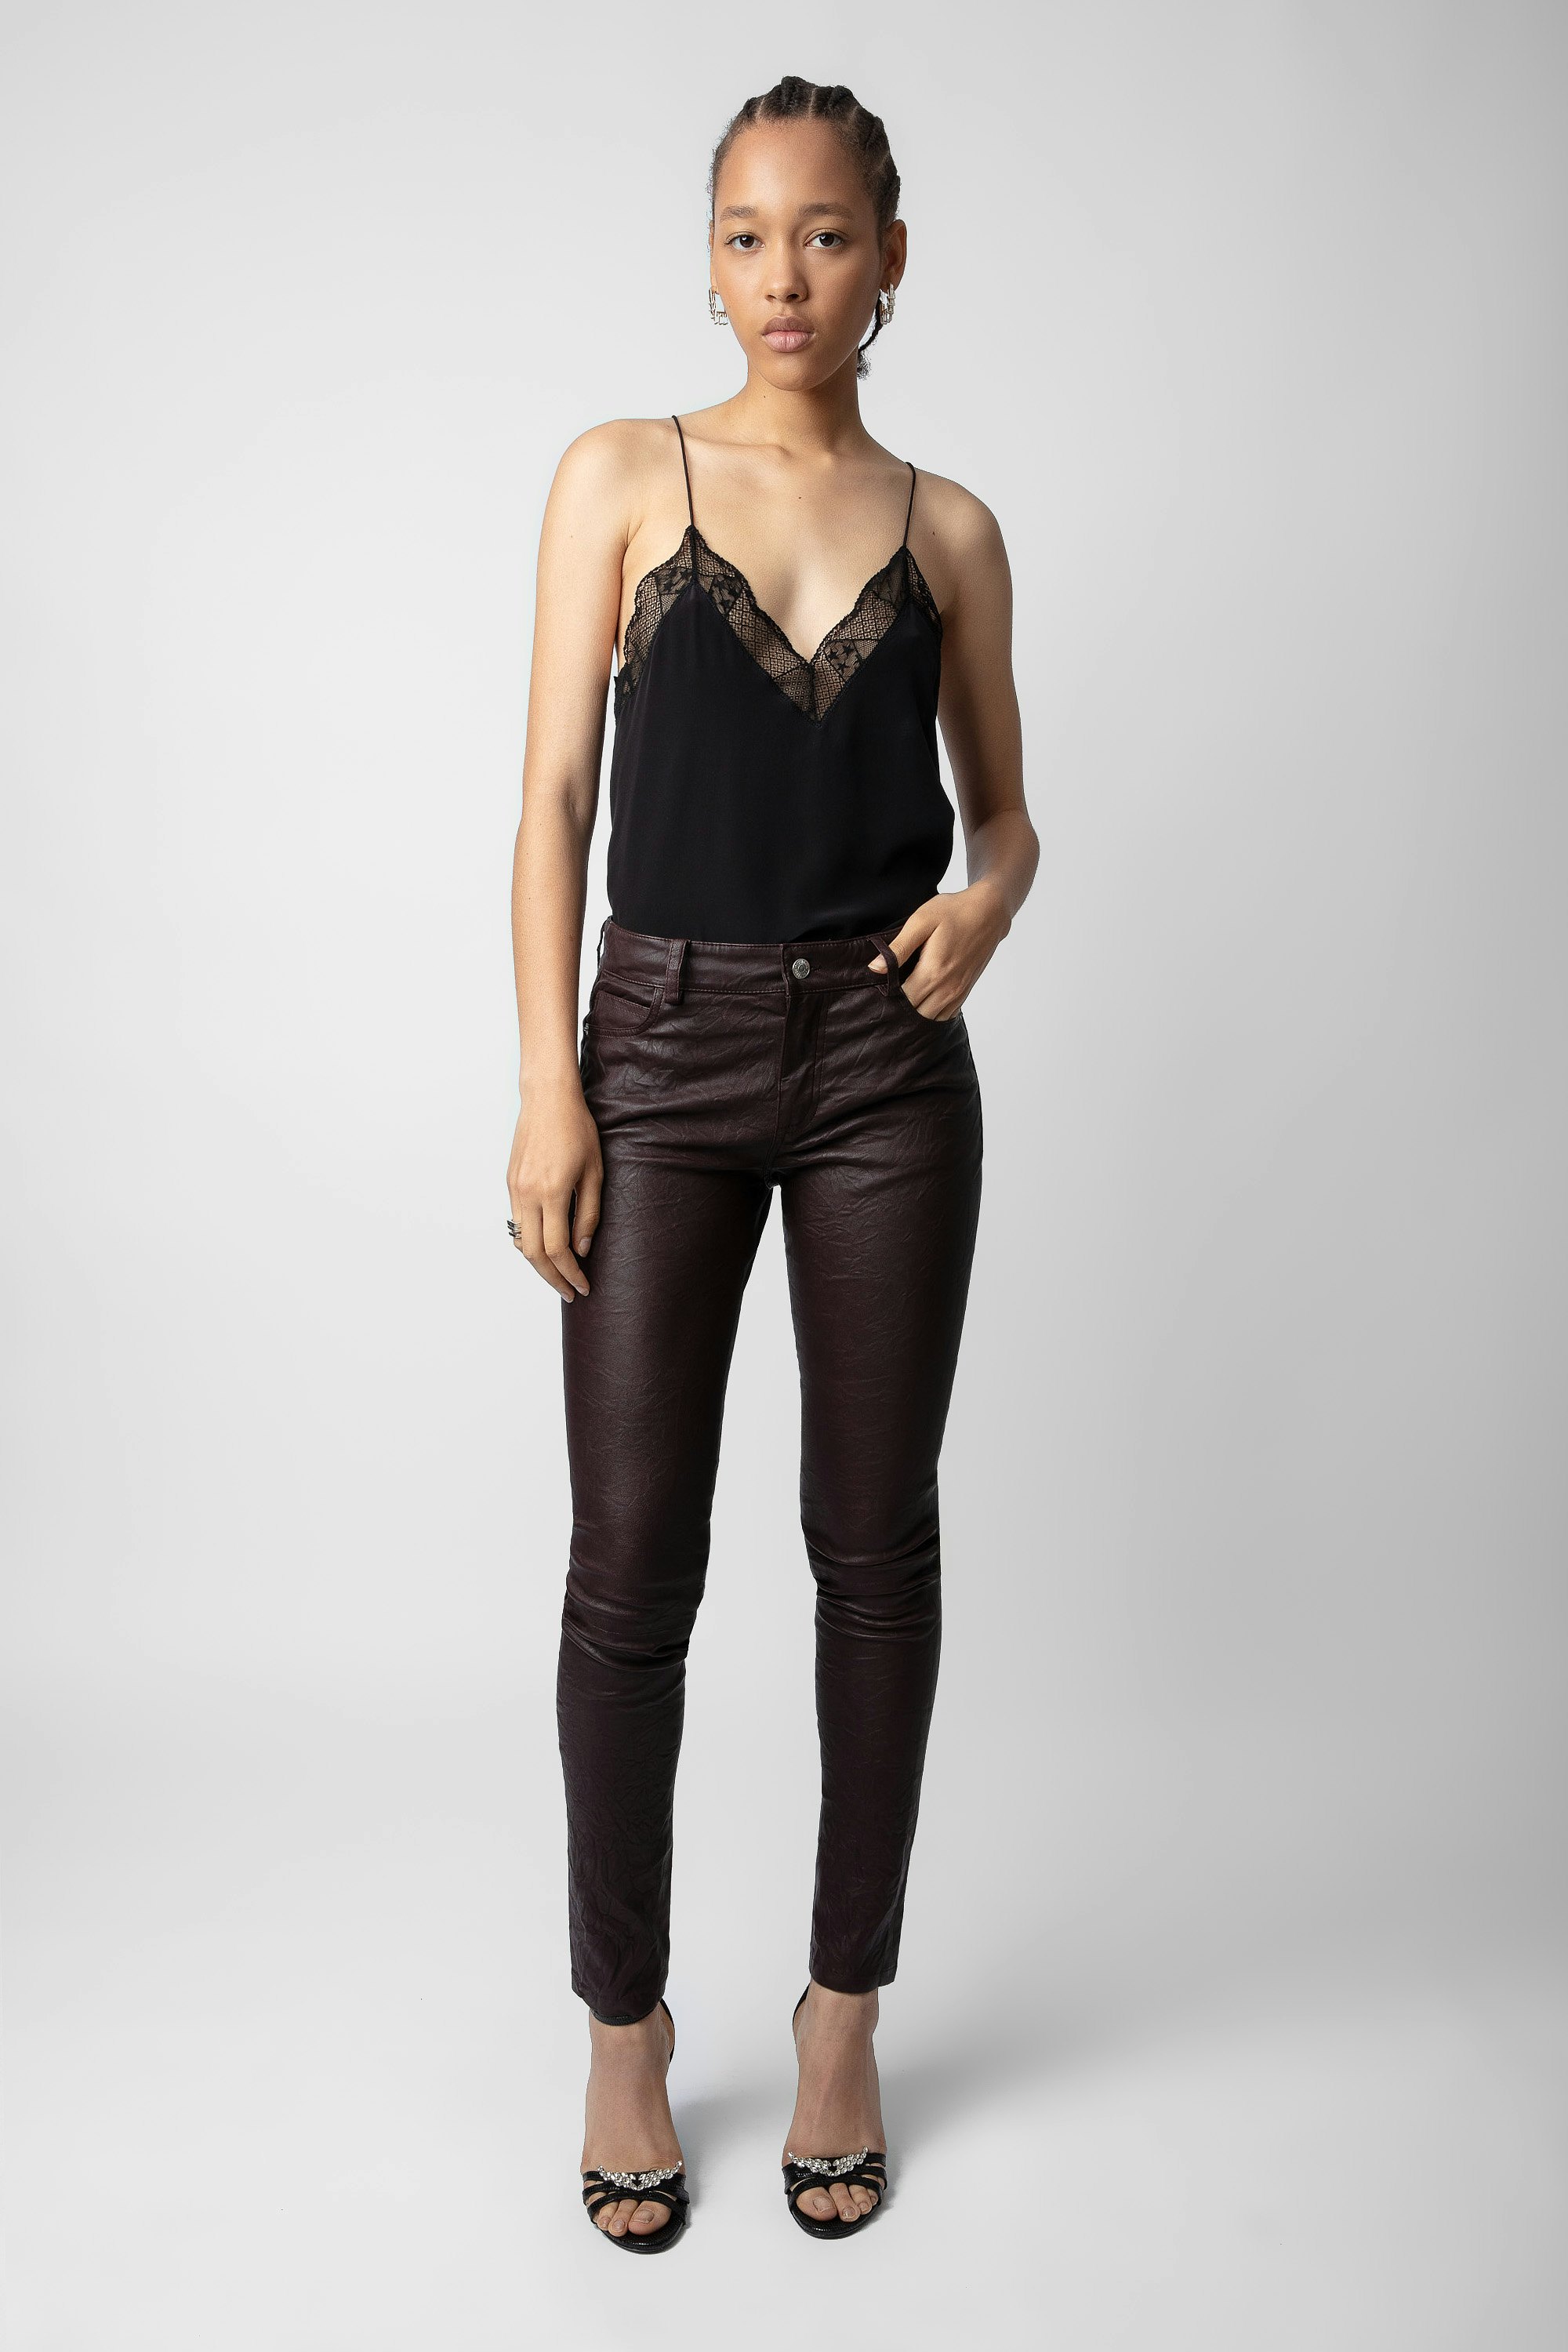 Phlame Crinkled Leather Trousers - Women’s brown crinkled leather trousers